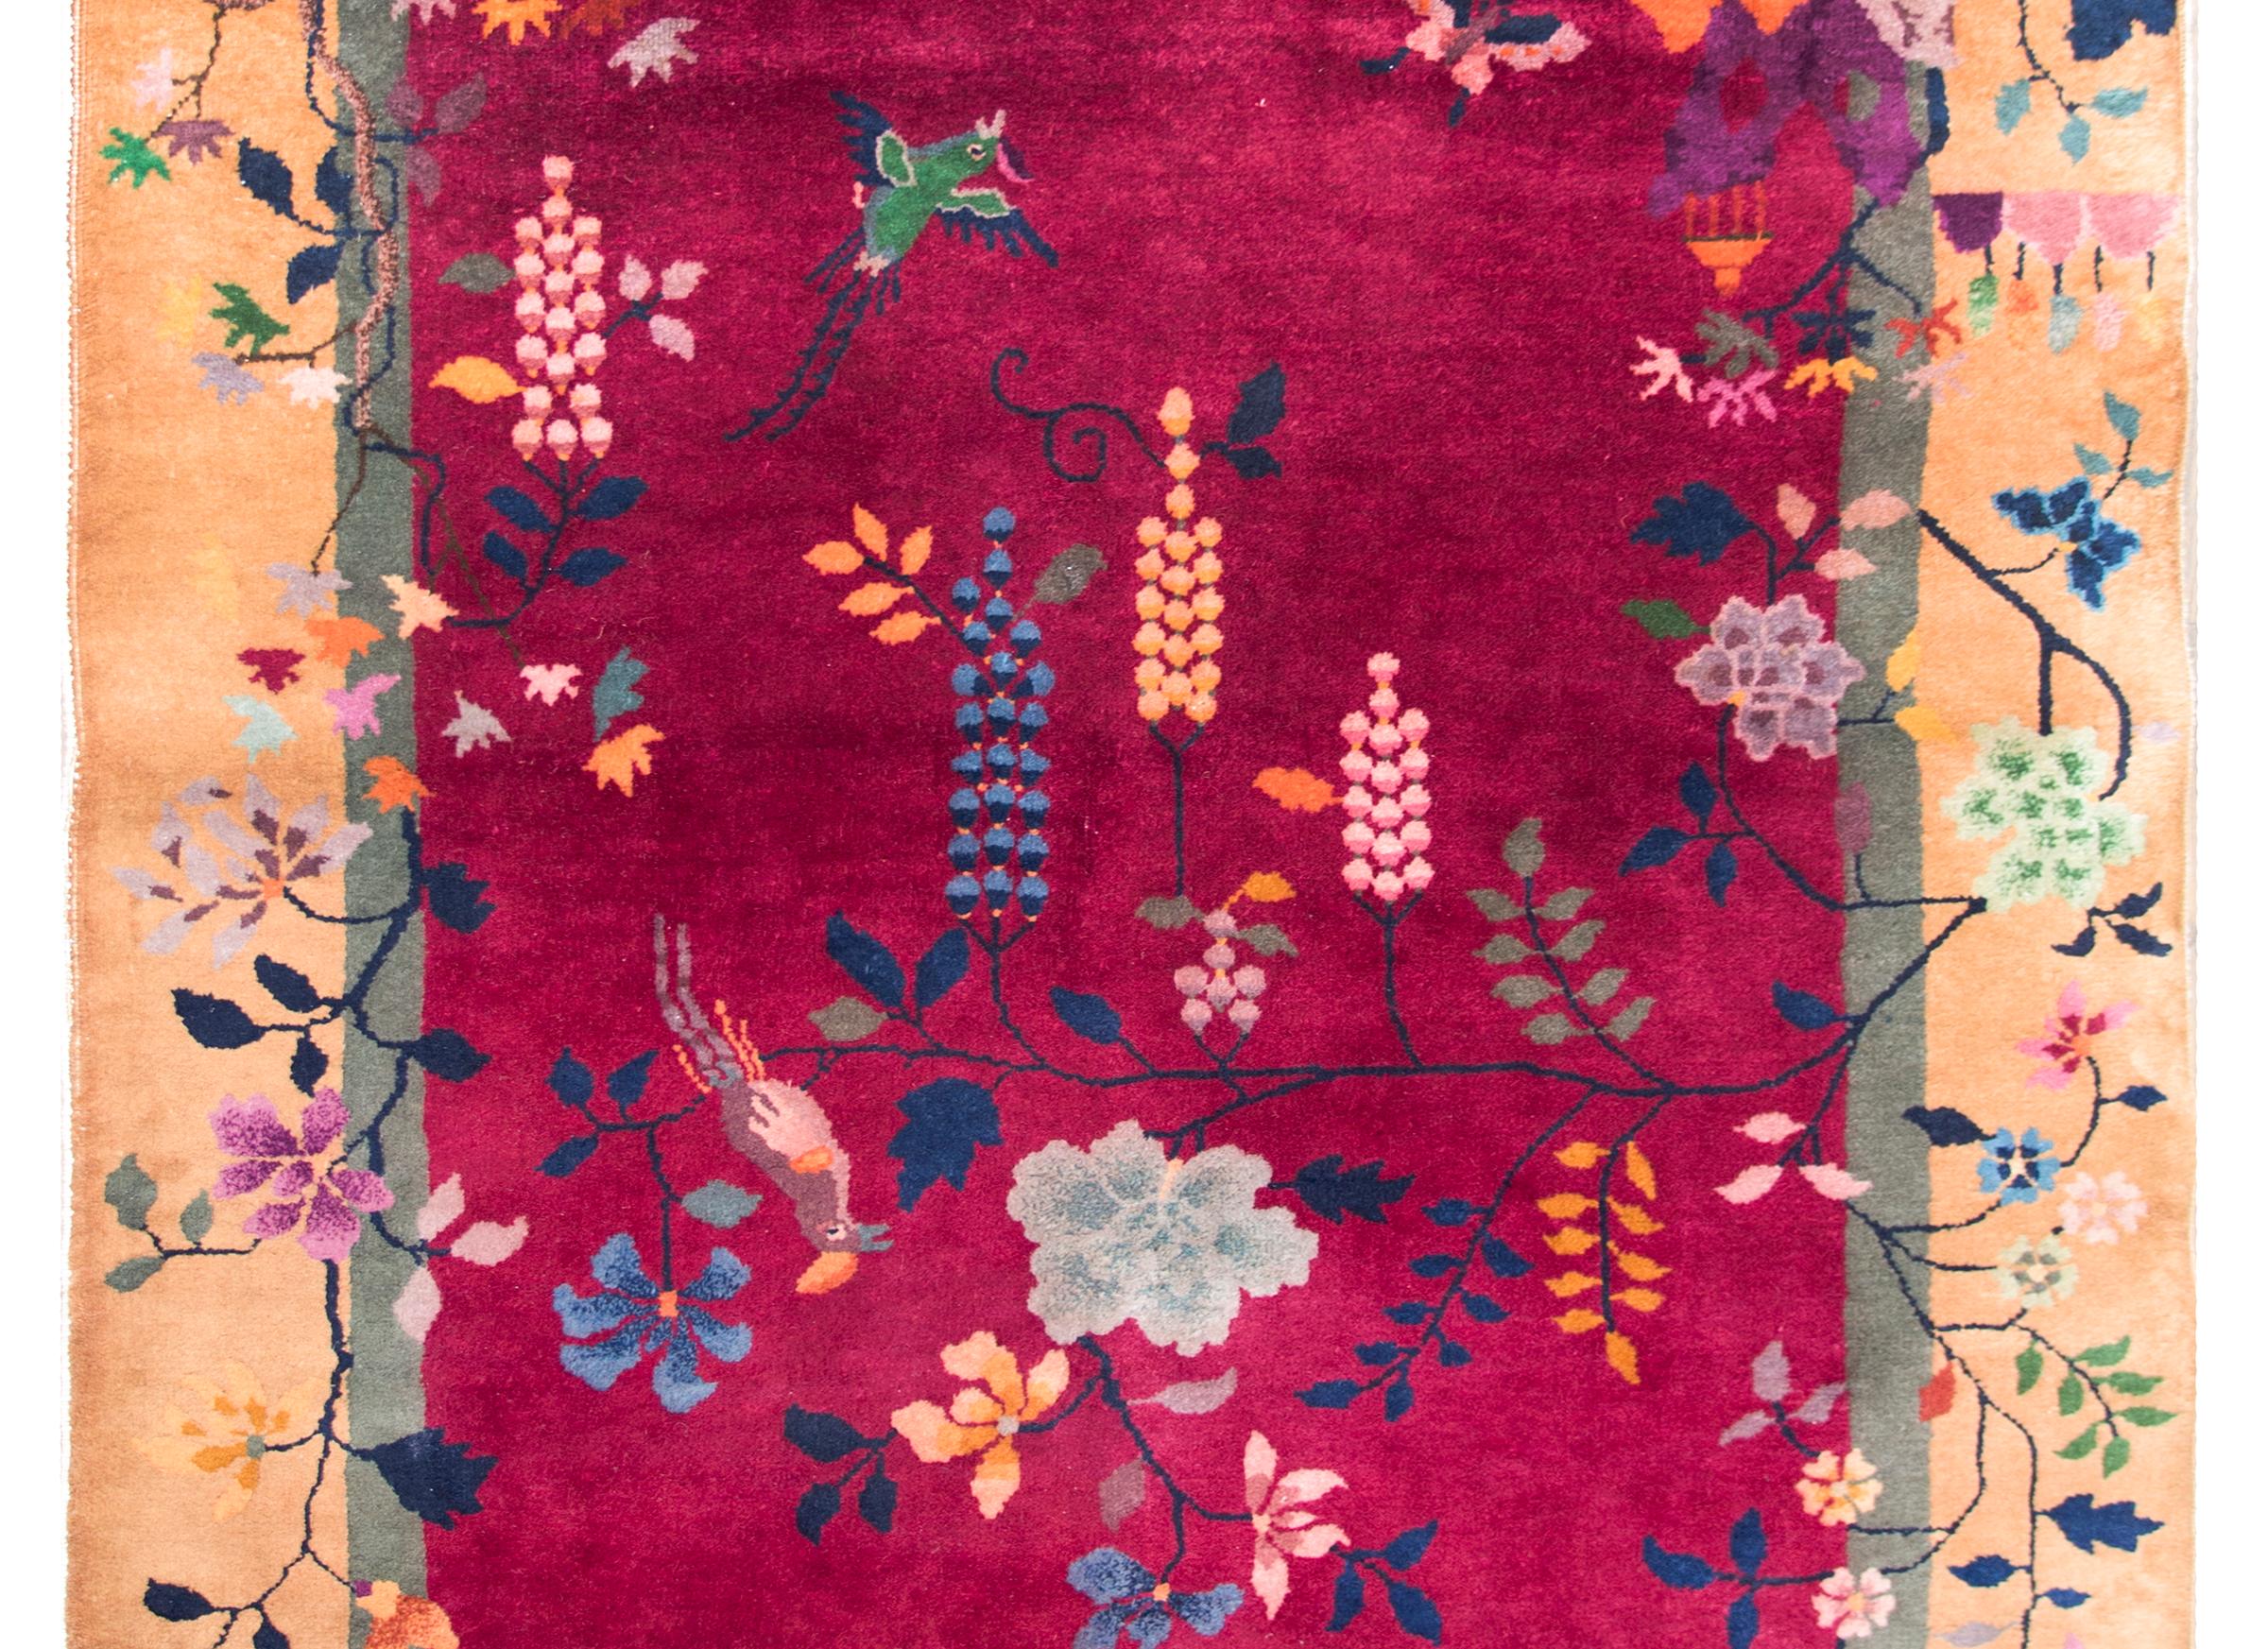 A beautiful early 20th century Chinese Art Deco rug with a fuchsia background, champagne colored border, and overlaid with myriad auspicious flowers including peonies, chrysanthemums, and branch with birds hanging over a pagoda in a garden landscape.